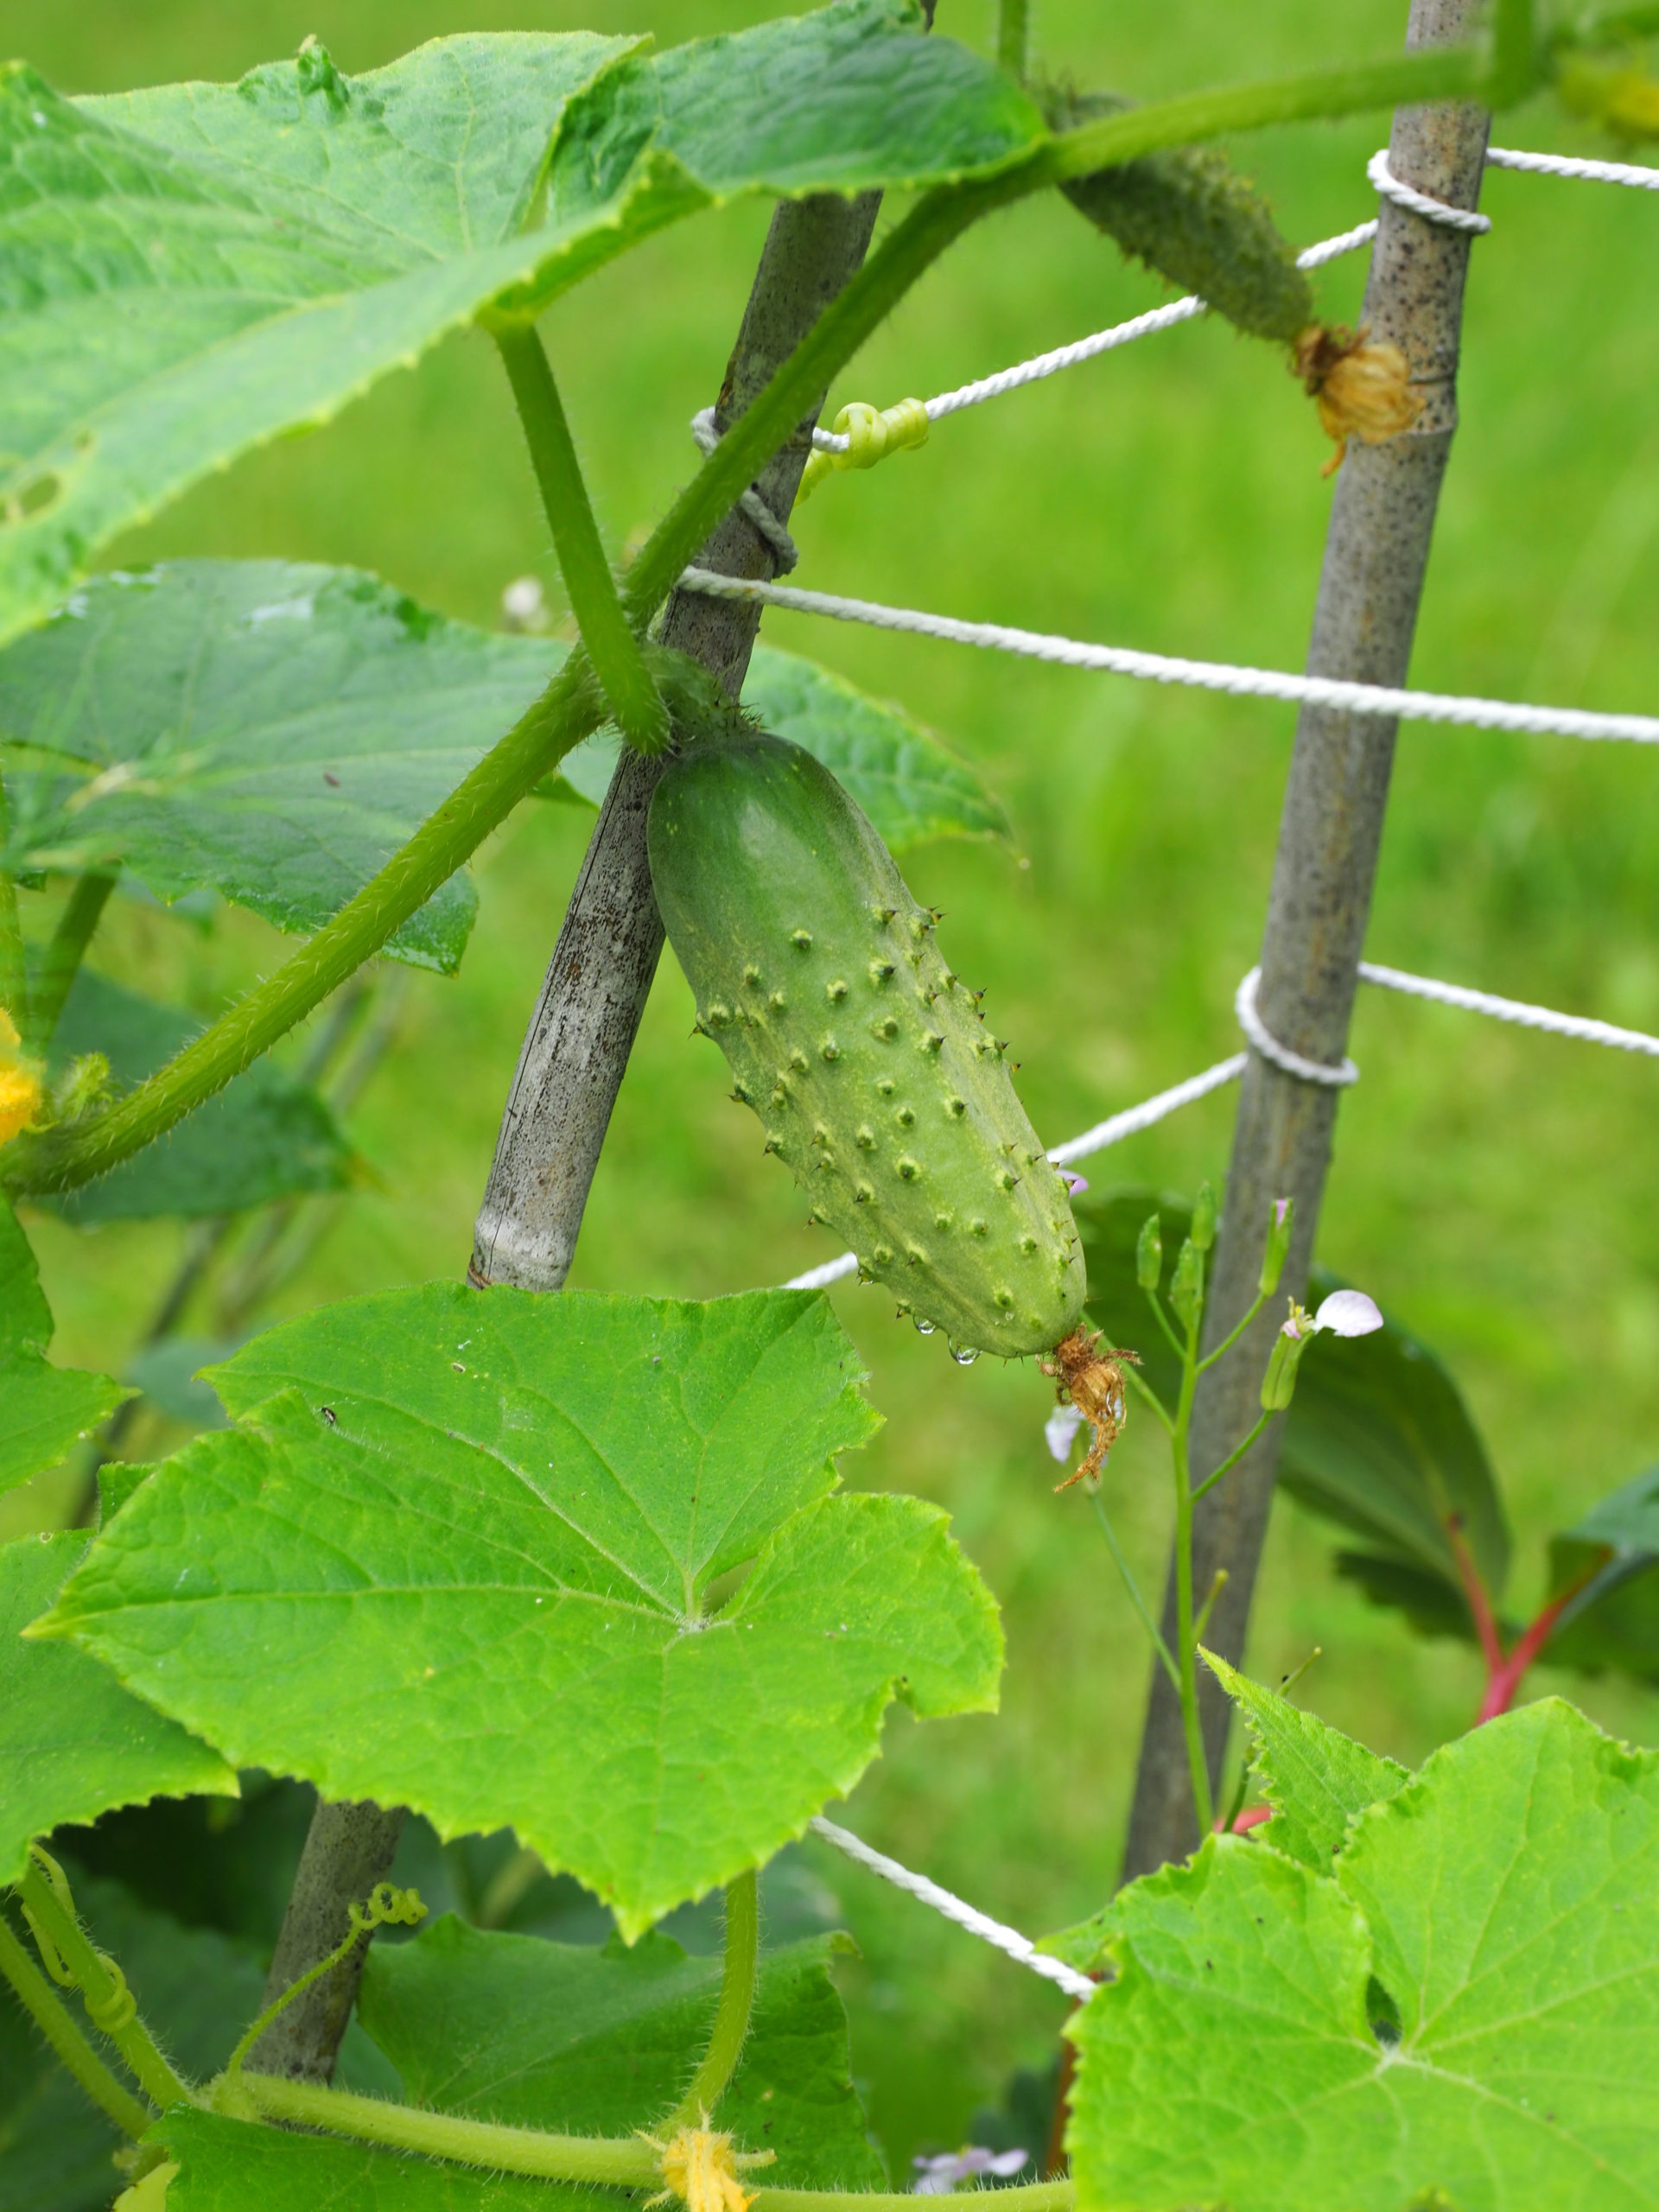 It’s important to know where your cukes and zukes are. Once past this  3-inch stage, both grow quickly and will be ready for harvest in a week or so. They do like to hide so hunt them out and know where to look a few days later.